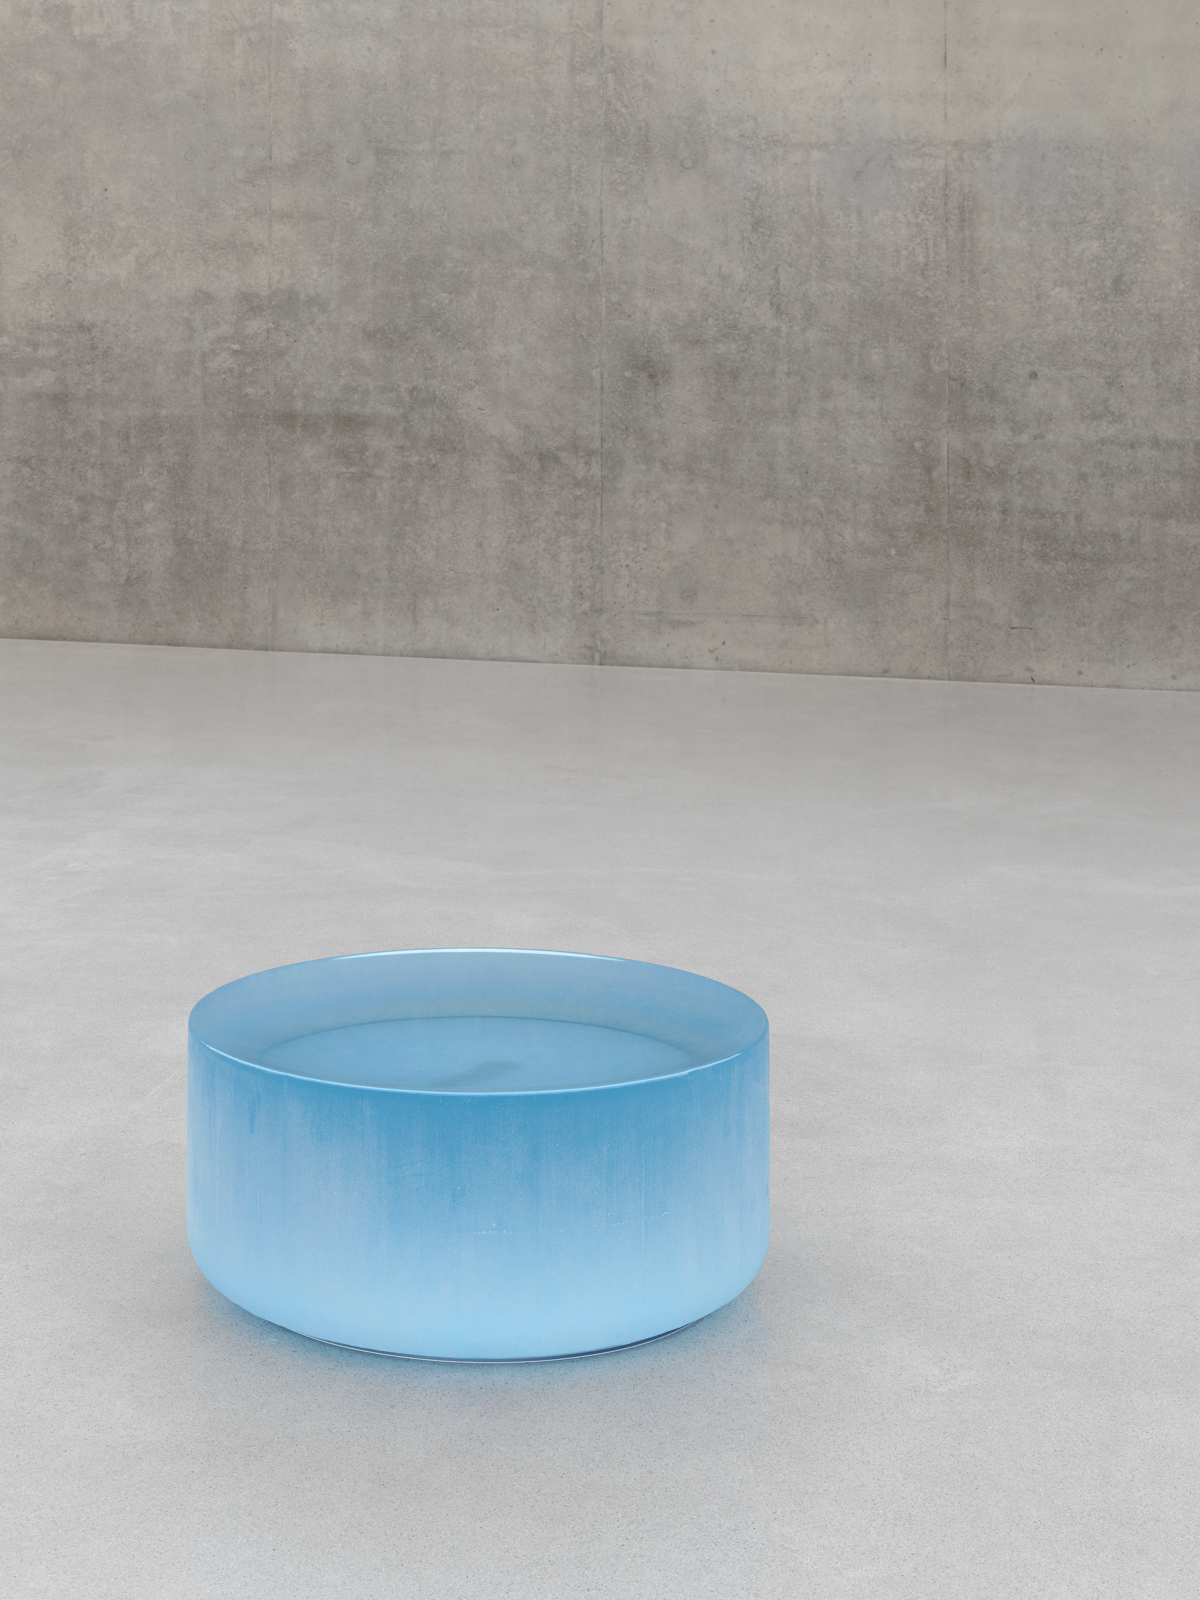 Roni Horn / Well and Truly, installation view, "Well and Truly", Kunsthaus Bregenz, 2010 / 2010